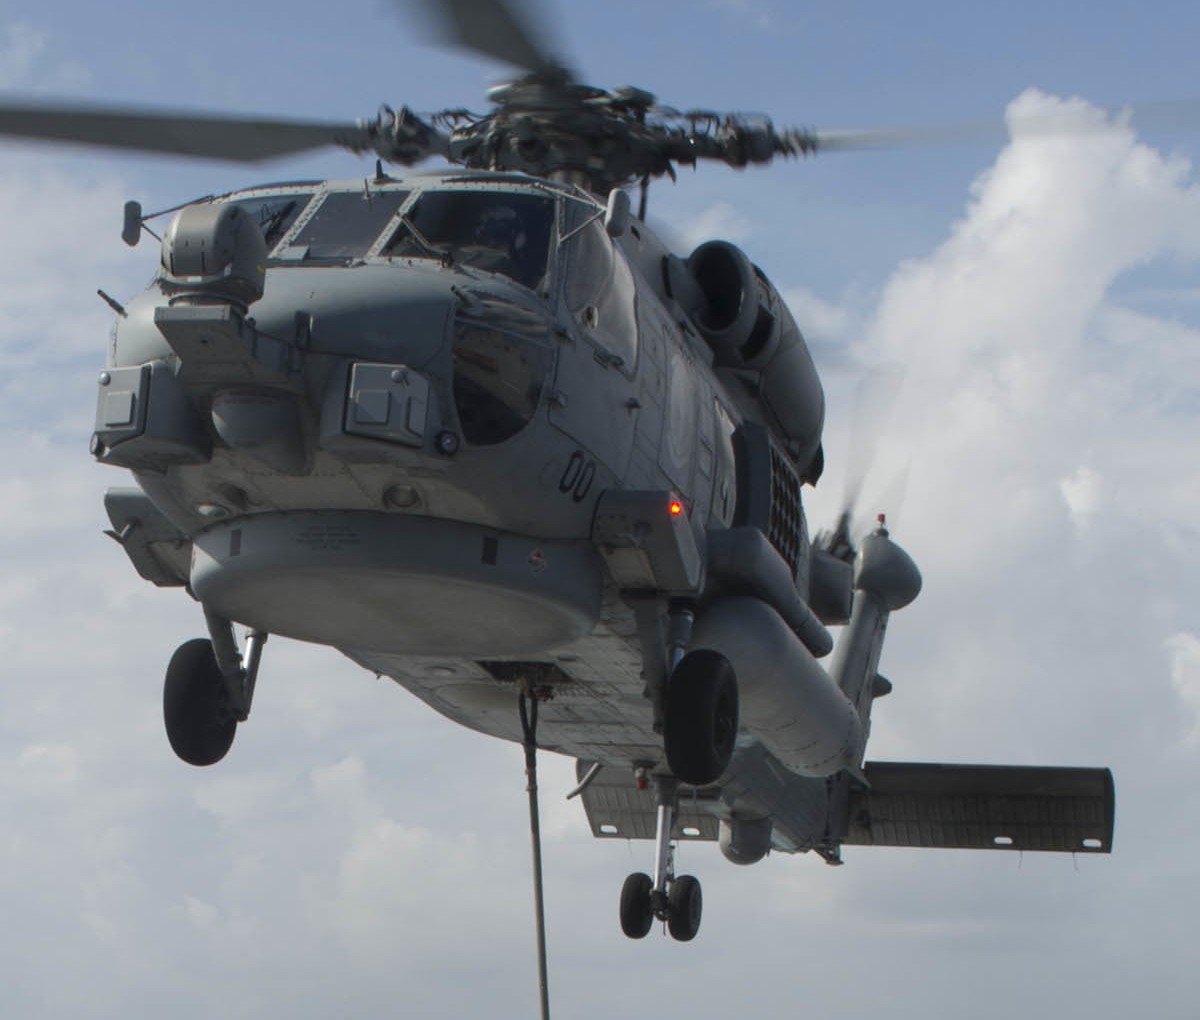 hsm-51 warlords helicopter maritime strike squadron mh-60r seahawk navy 2014 72